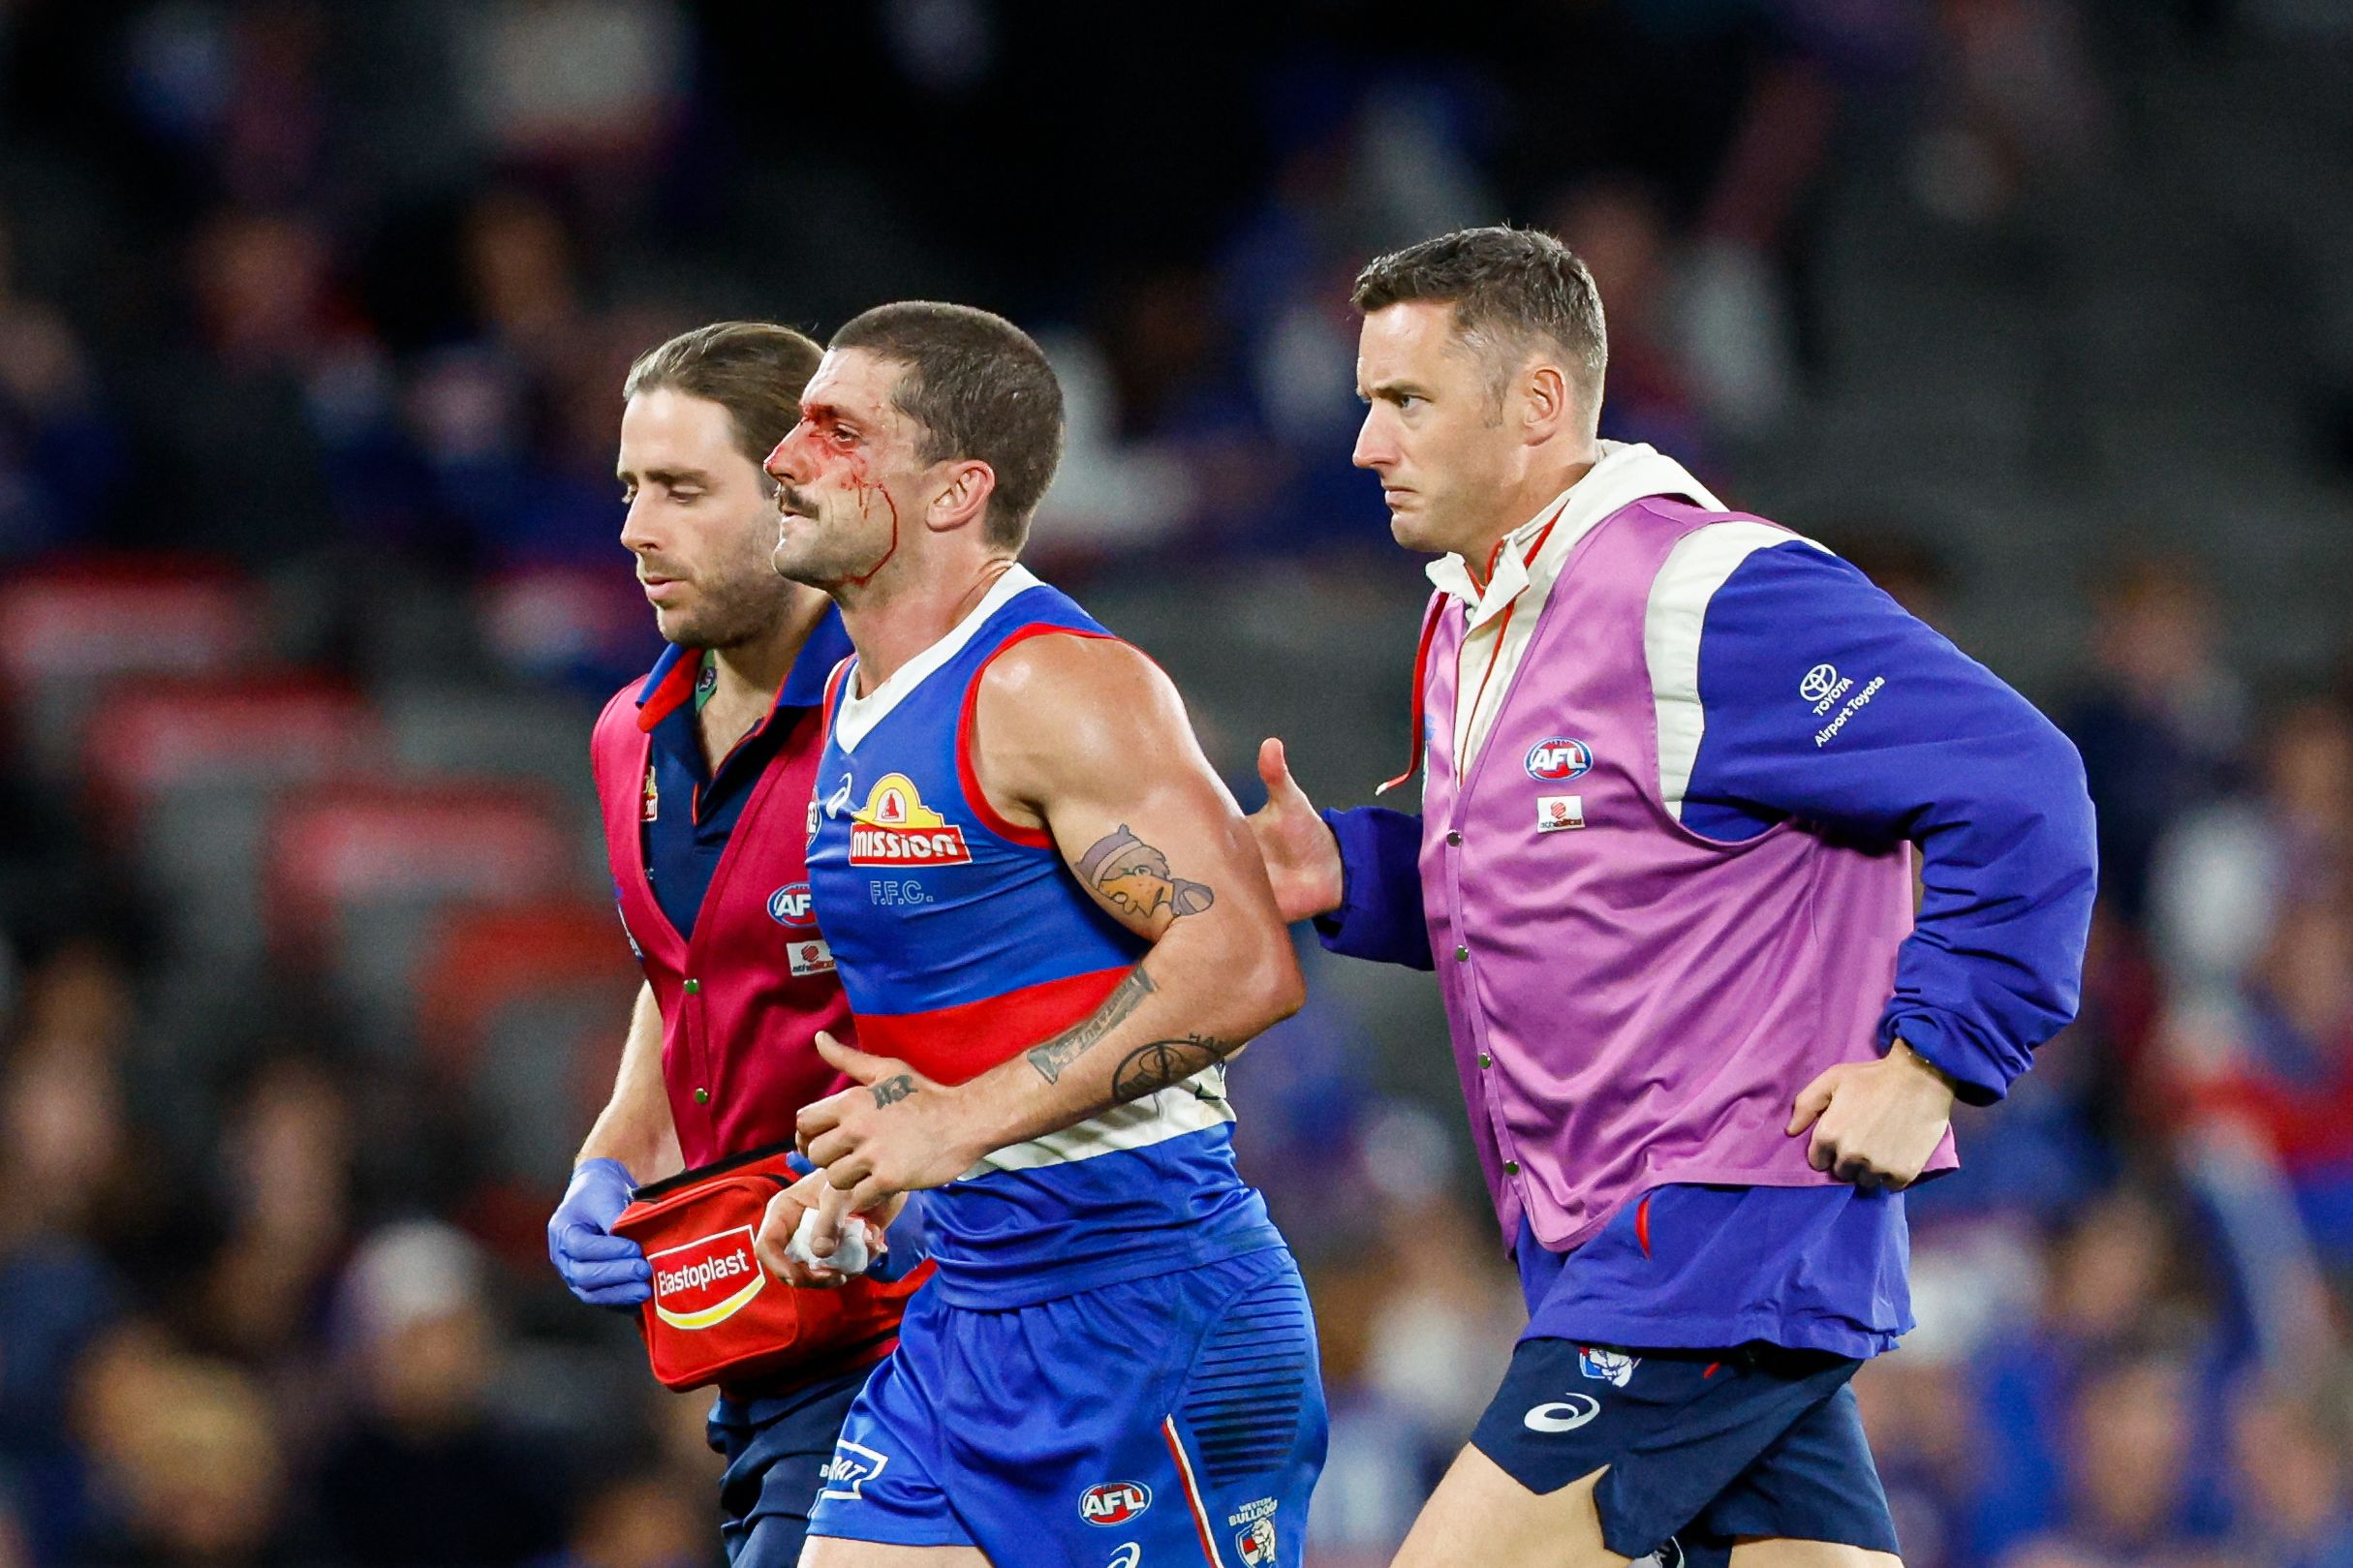 Western Bulldogs star Tom Liberatore ruled out "indefinitely" after second scary concussion